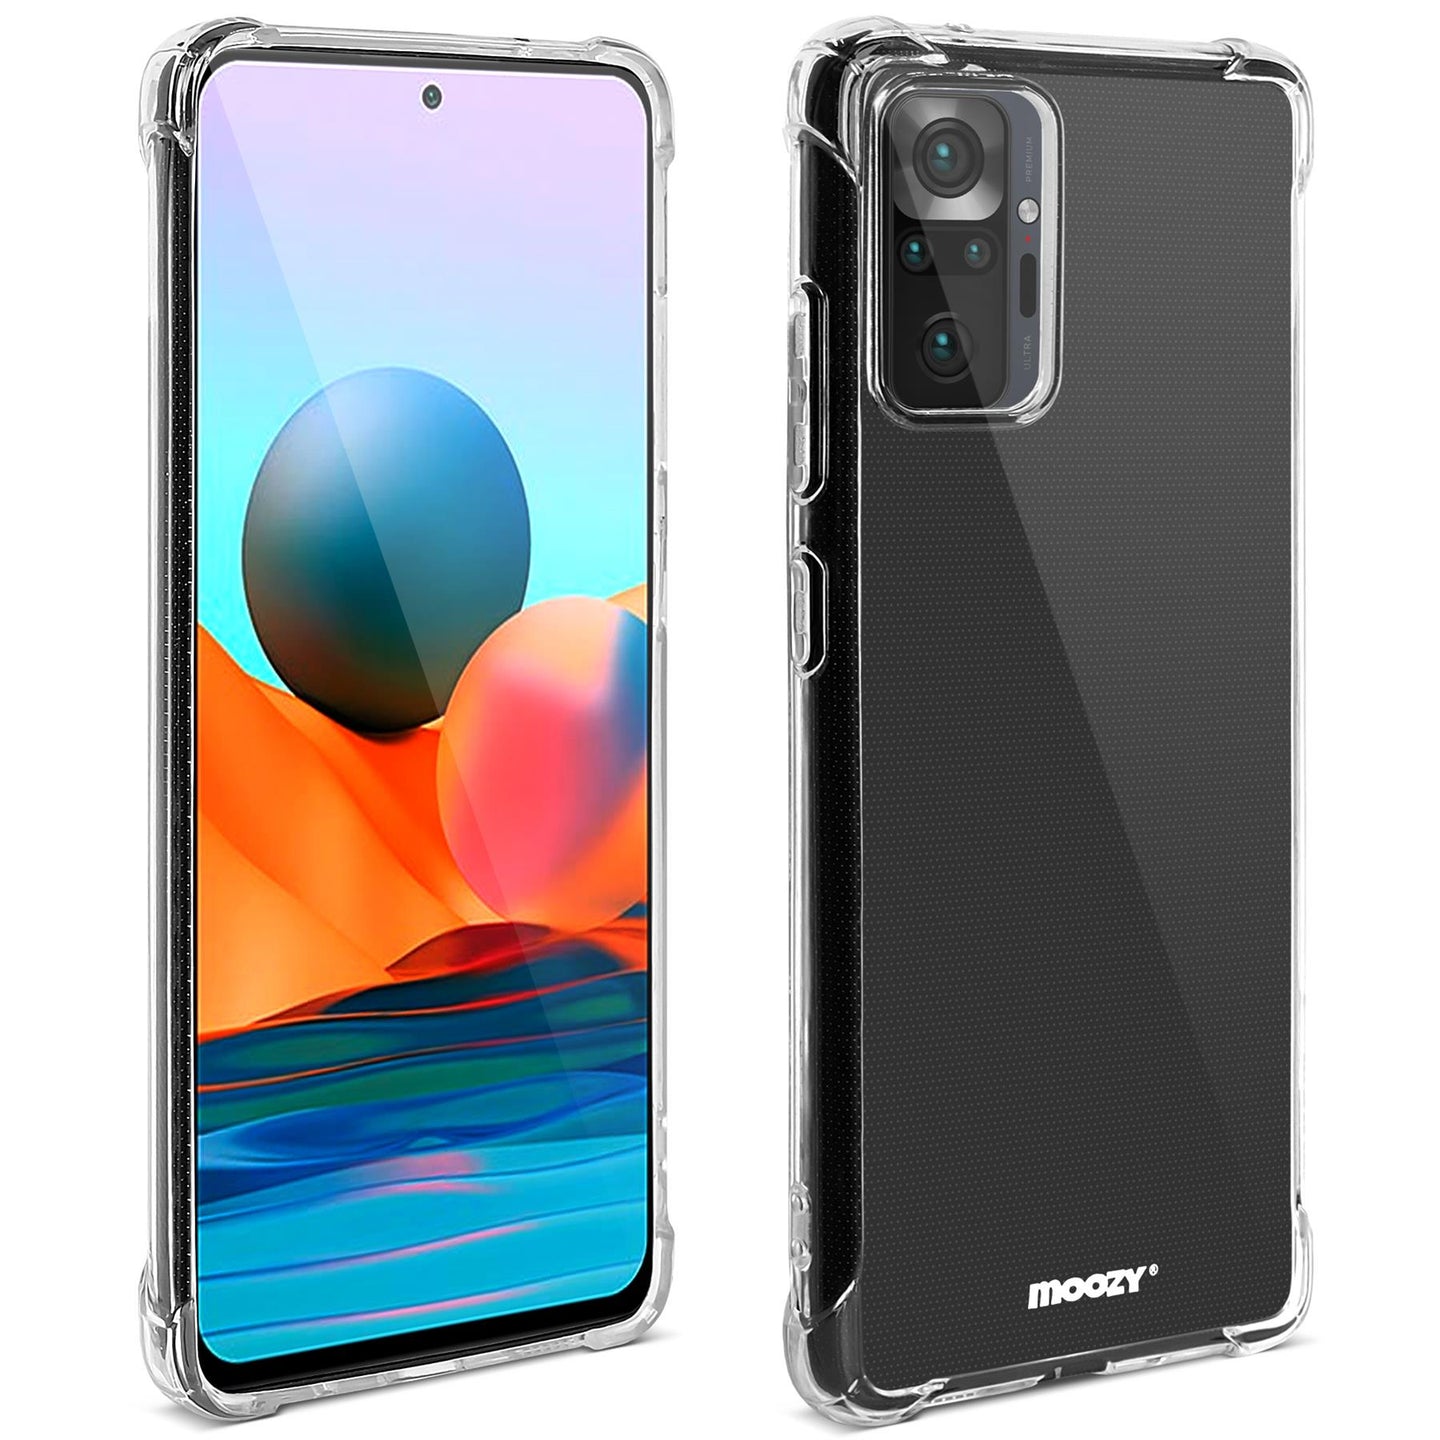 Moozy Shockproof Silicone Case for Xiaomi Redmi Note 10 Pro and Note 10 Pro Max - Transparent Case with Shock Absorbing 3D Corners Crystal Clear